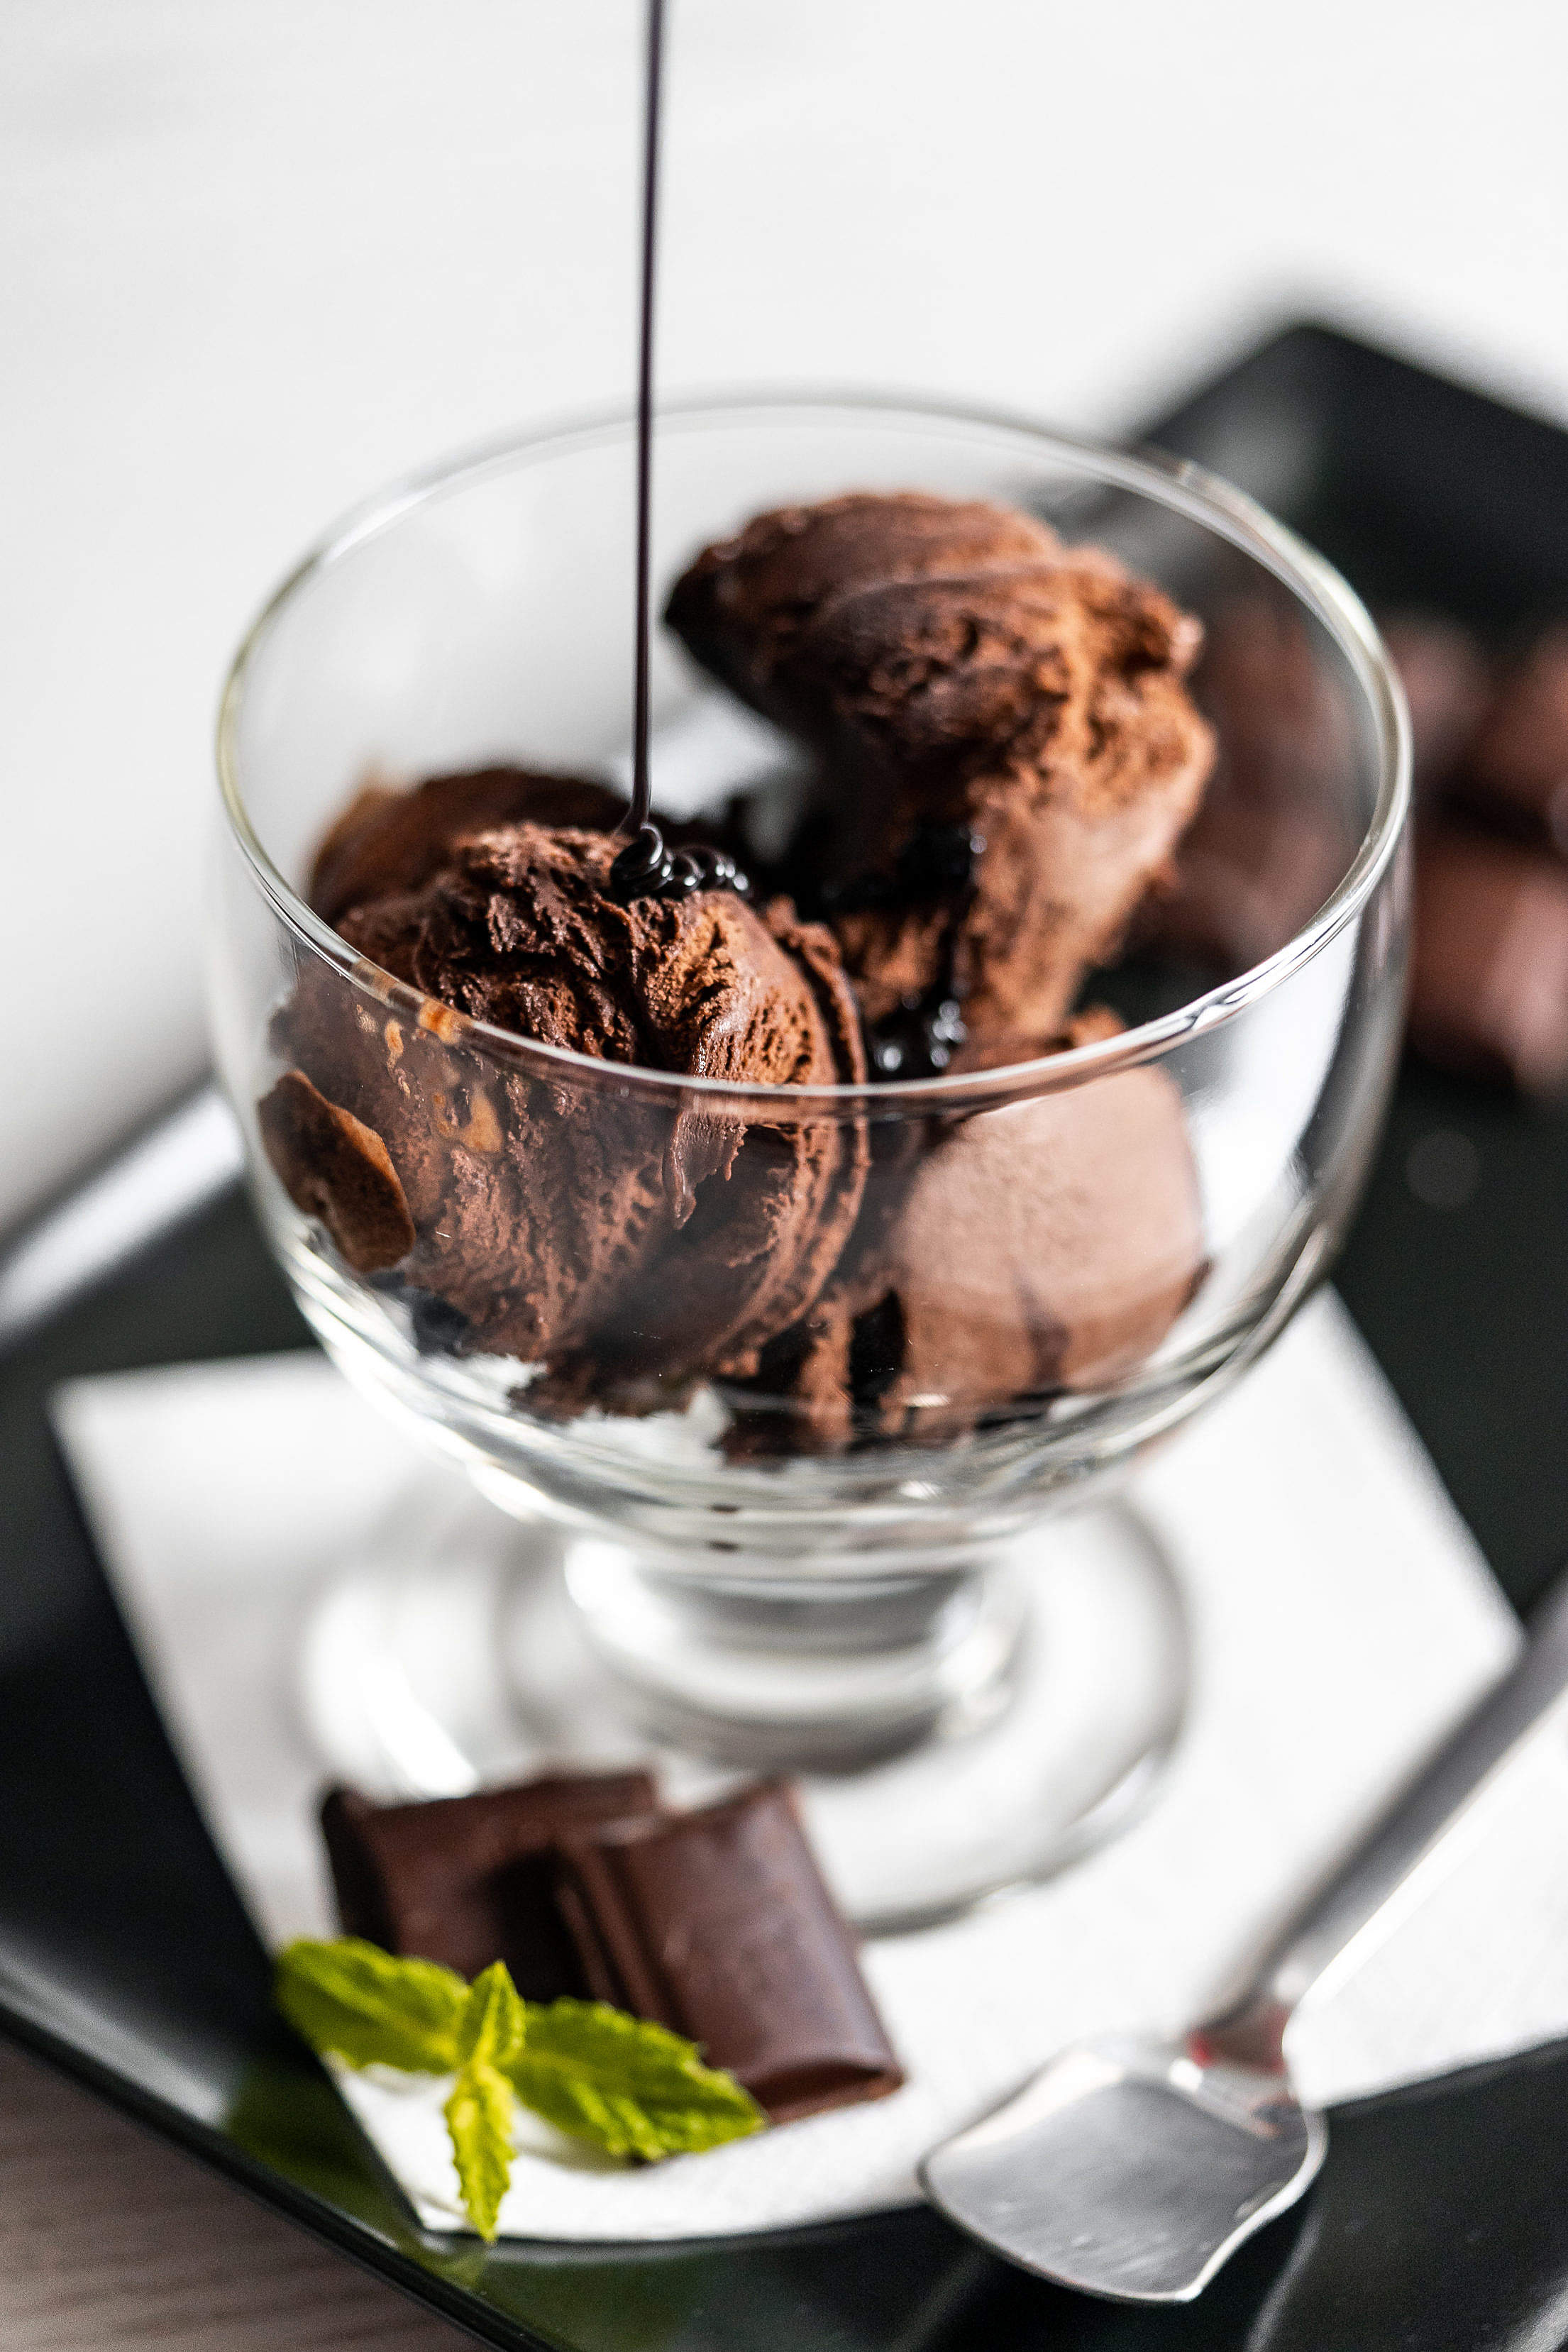 Pouring Chocolate Topping on The Ice-cream Sundae Free Stock Photo